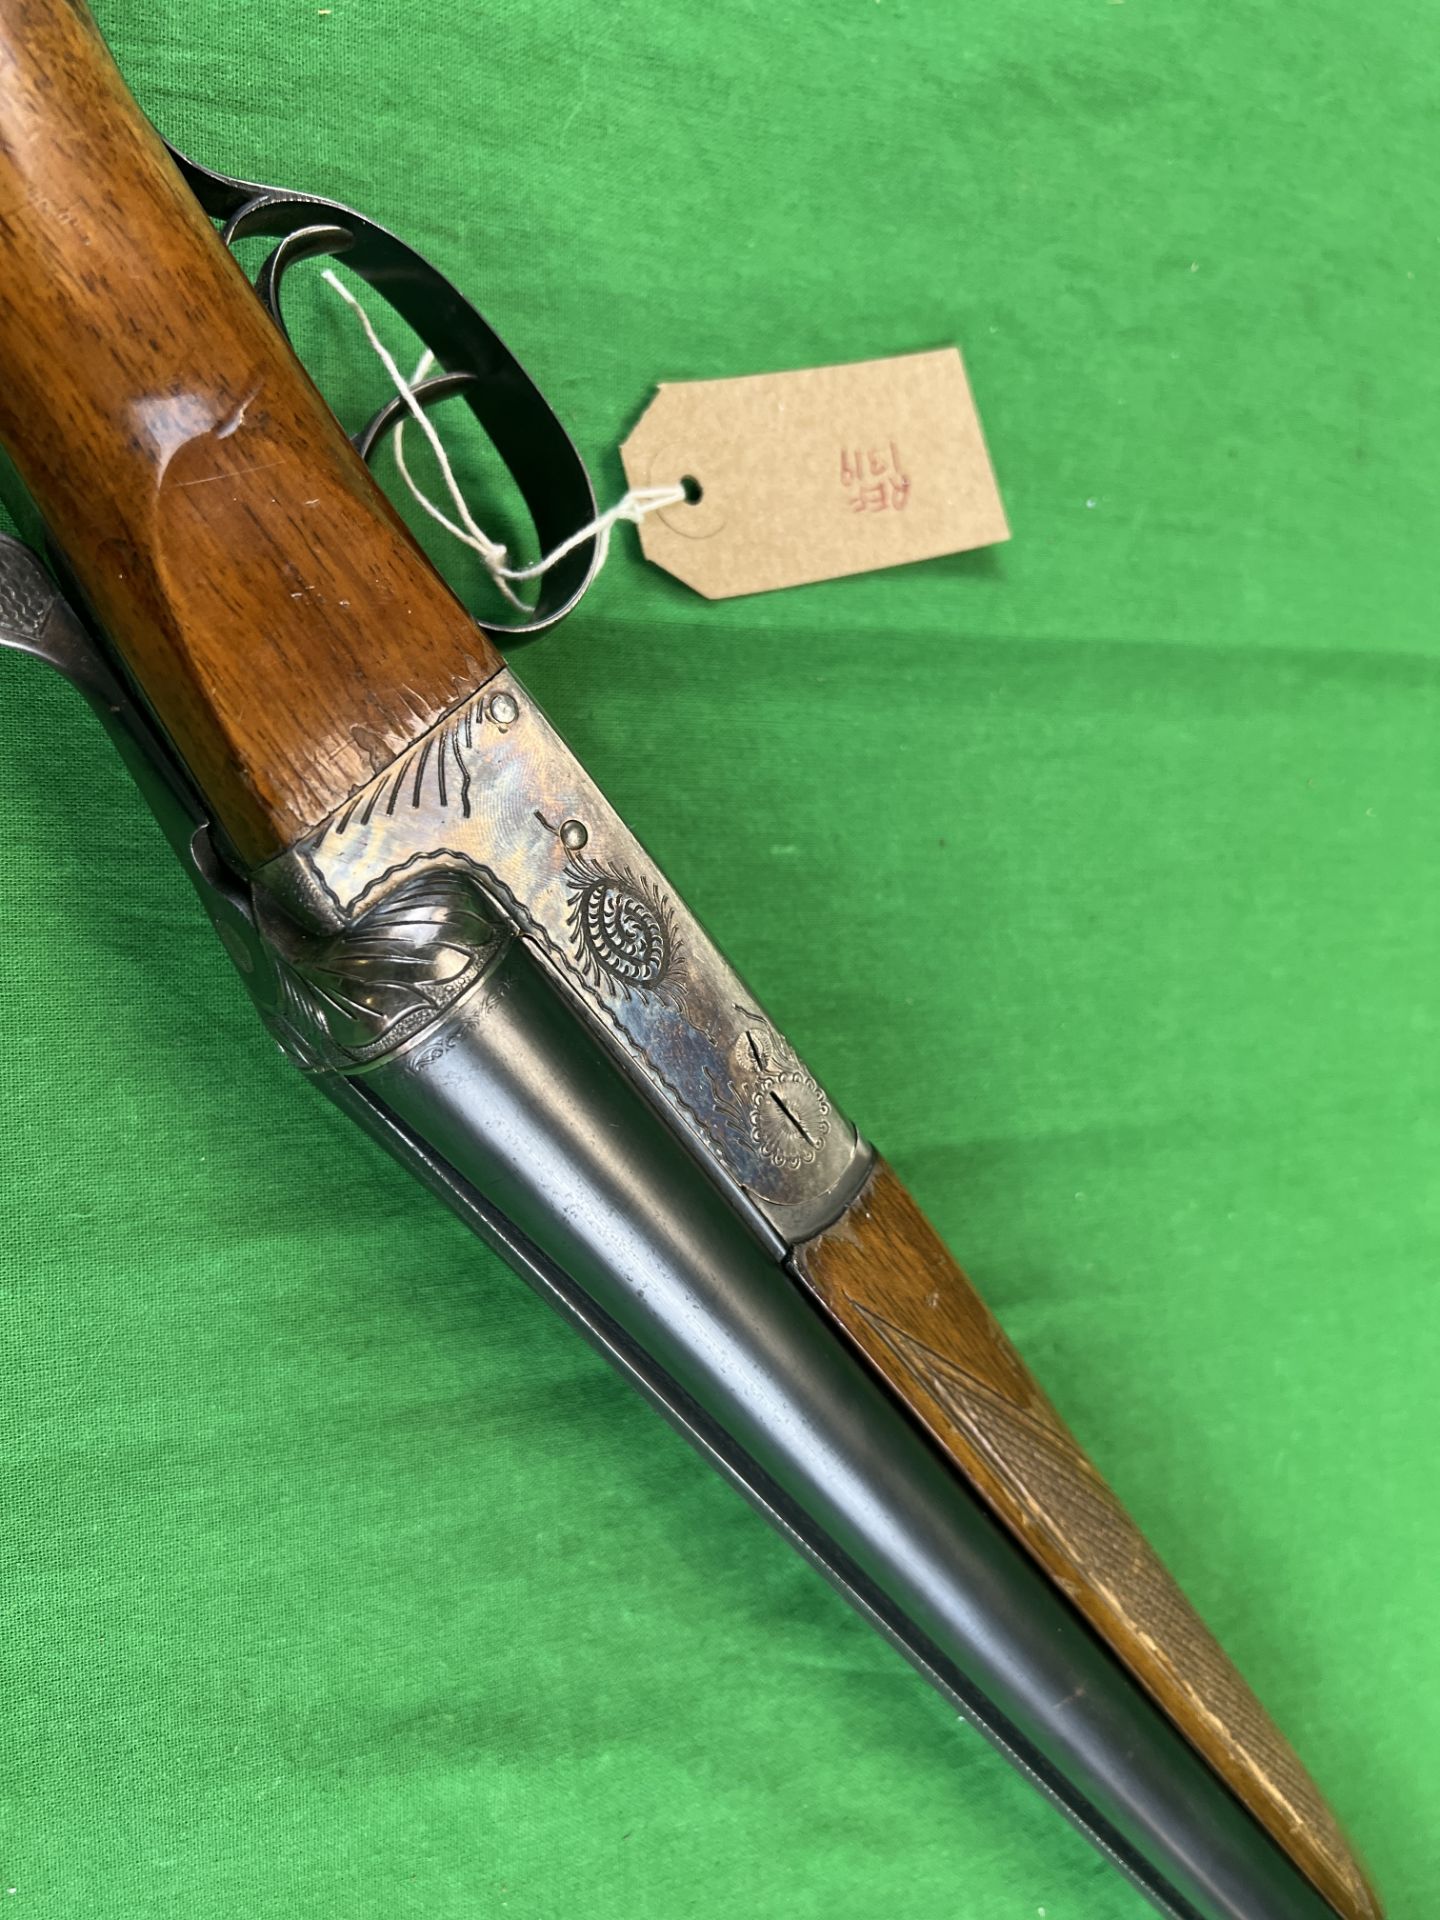 UGARTECHEA 20 BORE SIDE BY SIDE SHOTGUN COMPLETE WITH GUN SLEEVE # 77570 - (ALL GUNS TO BE - Image 7 of 11